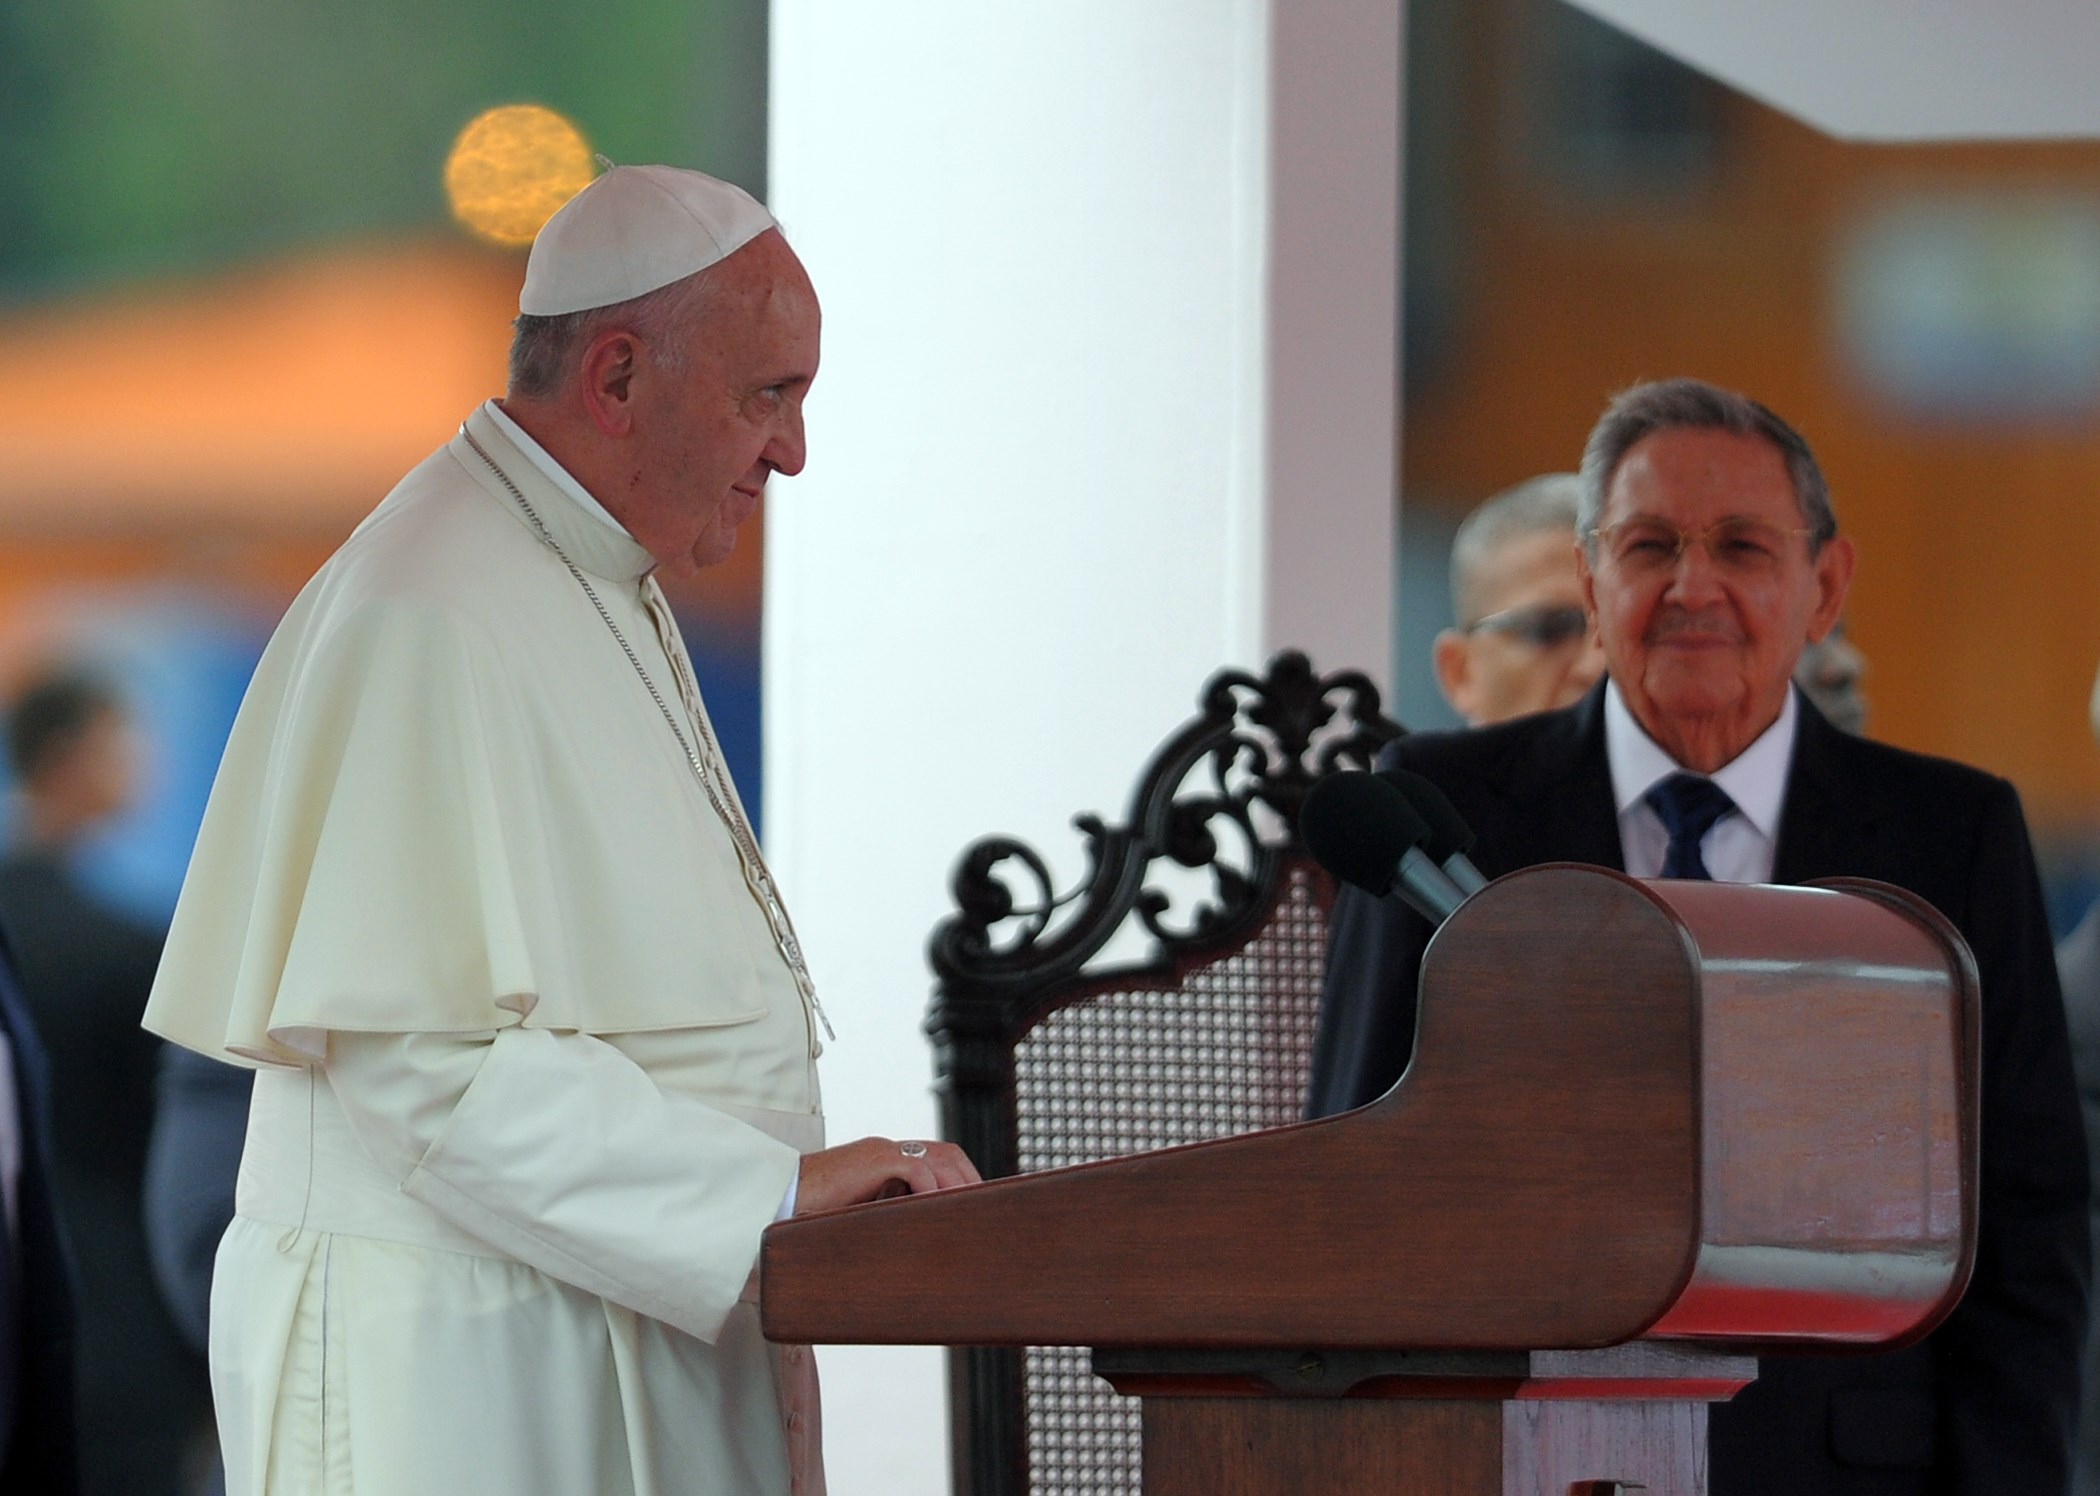 Pope Francis (L) stands next to Cuban President Raul Castro during his welcome ceremony upon landing at Havana's international airport on September 19, 2015, on the first leg of a high-profile trip that will also take him to the United States. AFP PHOTO / Yamil Lage        (Photo credit should read YAMIL LAGE/AFP/Getty Images)